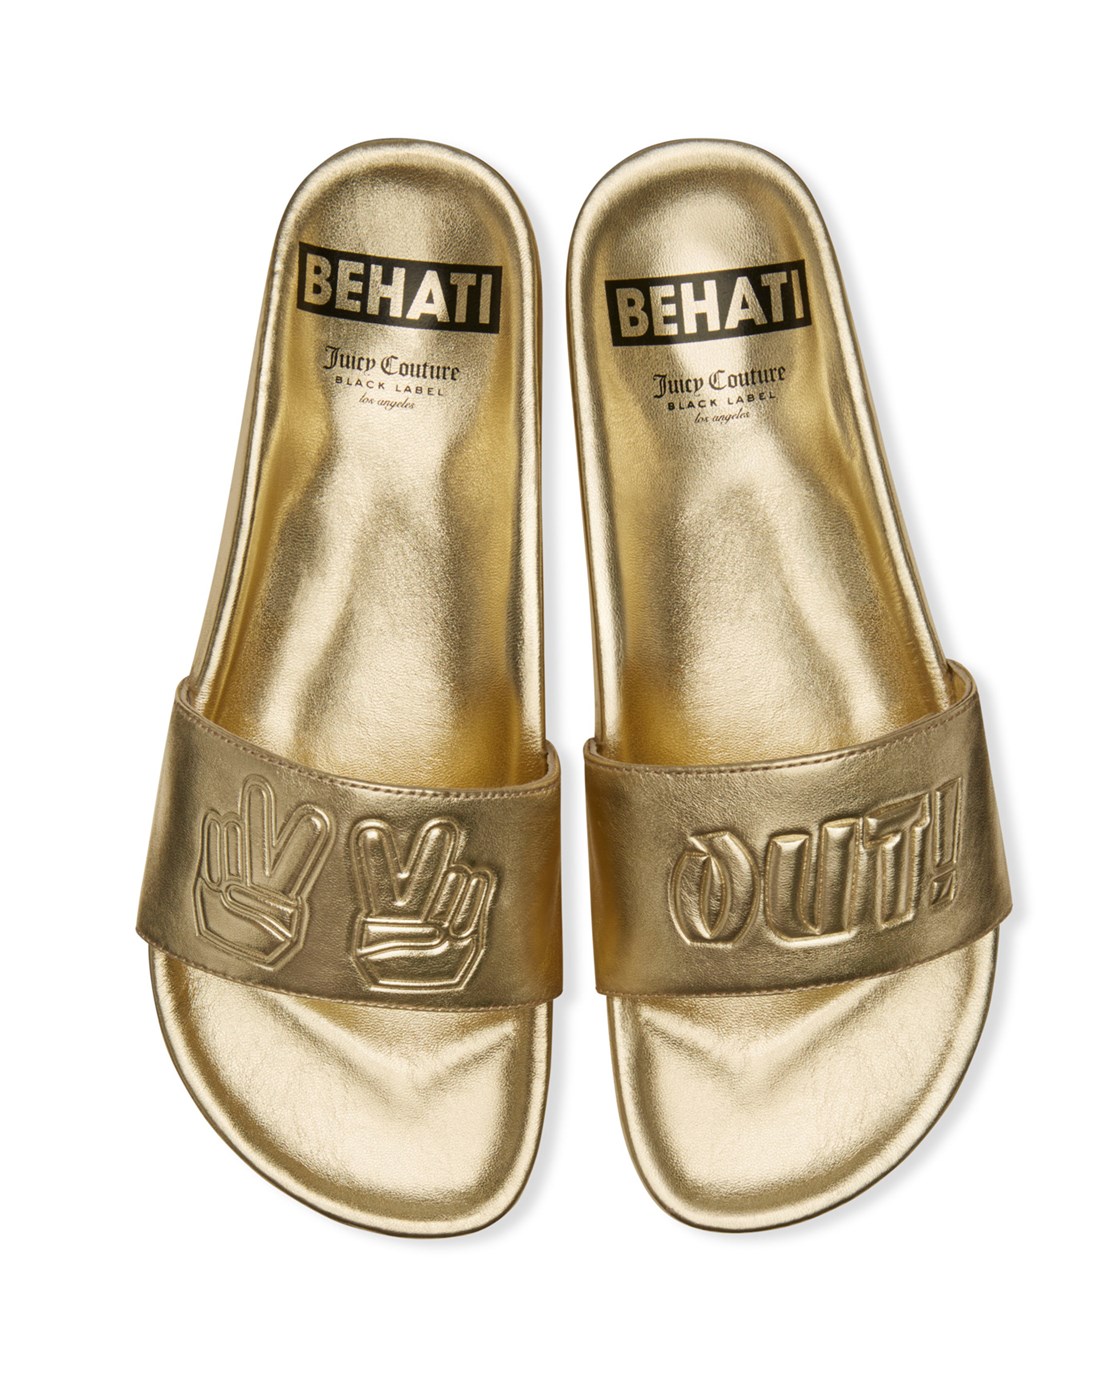 Juicy Couture Behati X  Peace Out Slide